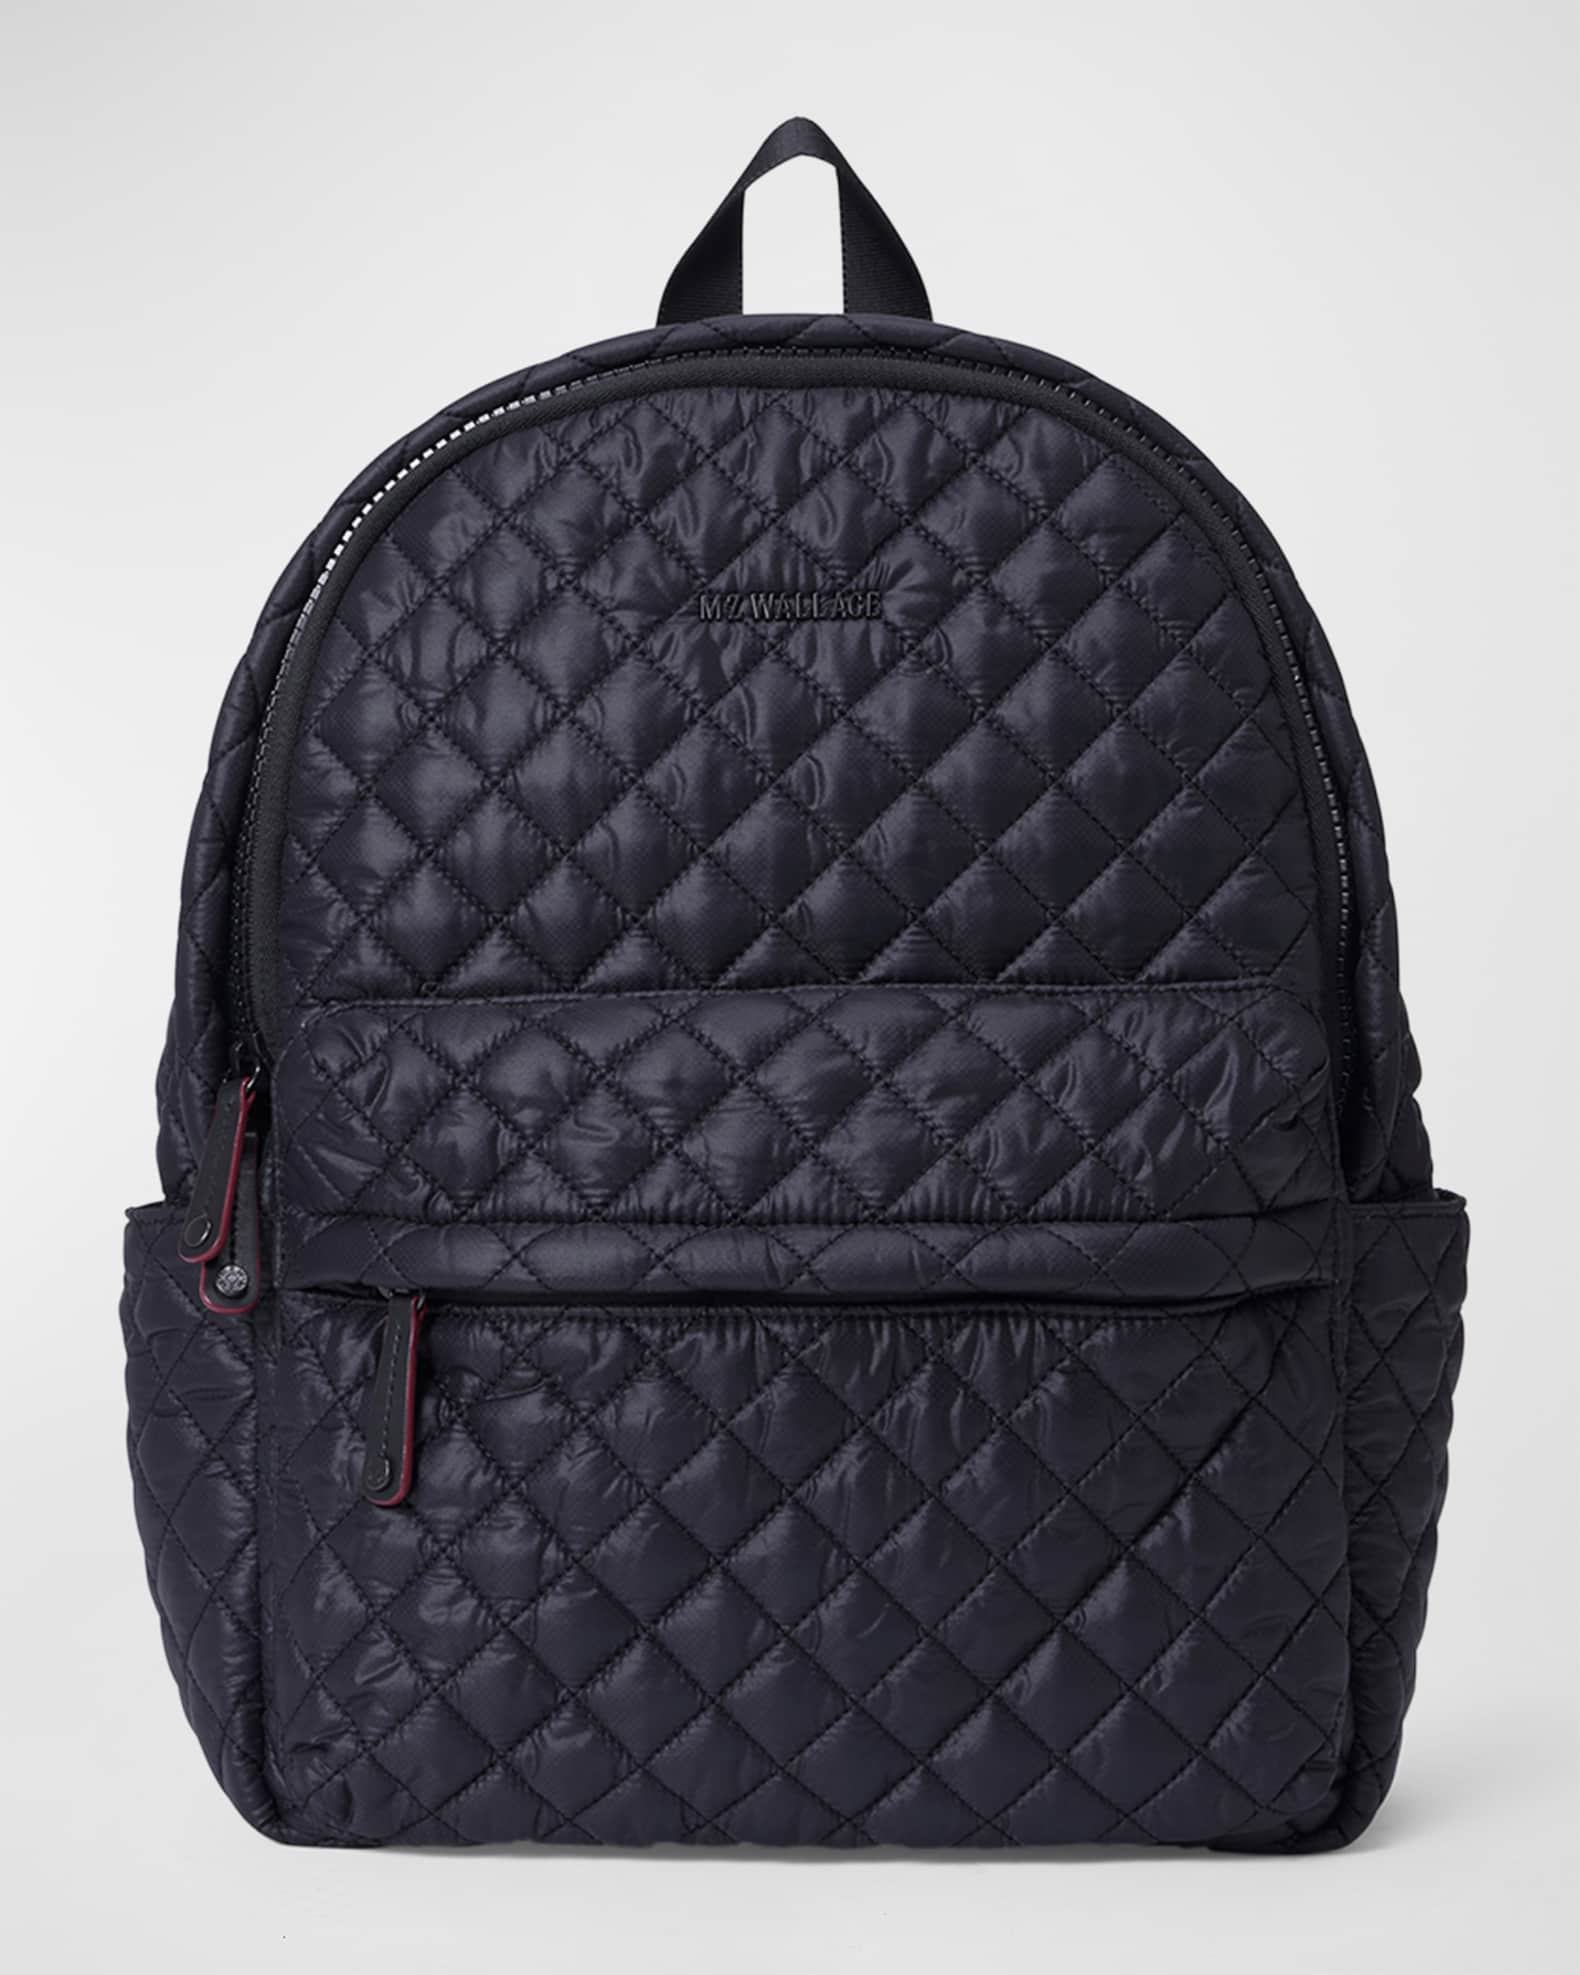 MZ WALLACE City Recycled Nylon Backpack | Neiman Marcus